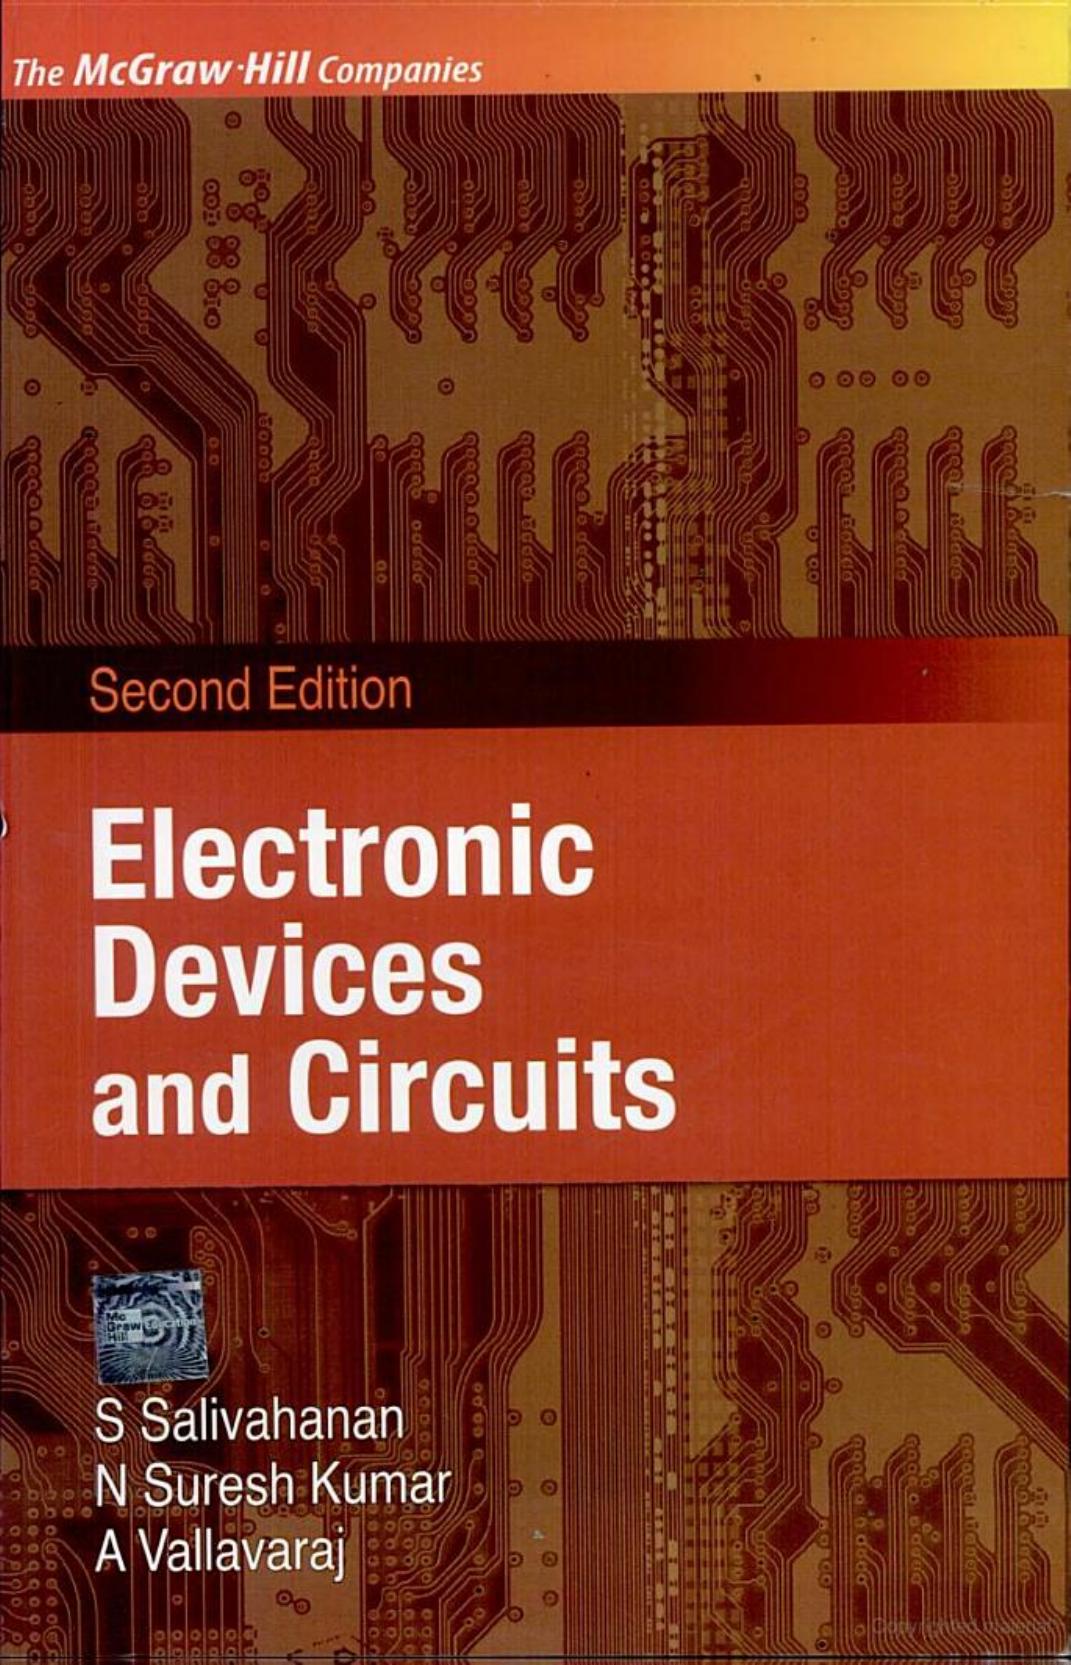 Electronic Devices and Circuits 2008.pdf